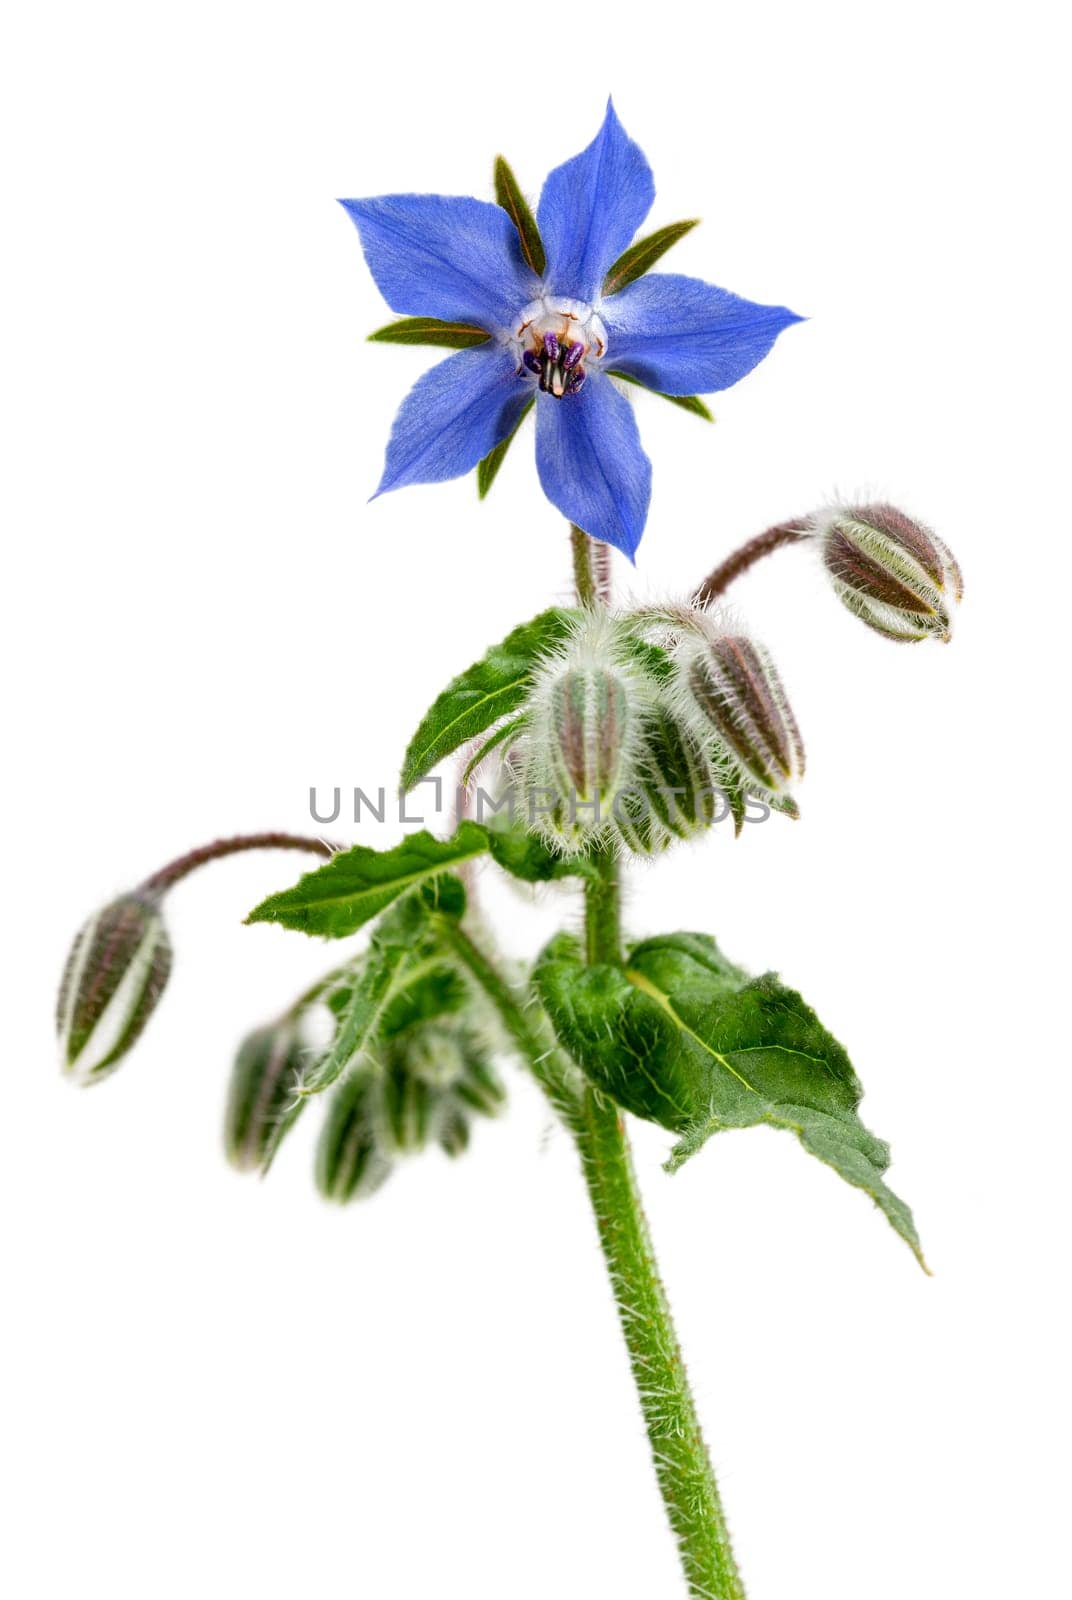 Heap of fresh blue borage flowers for decoration isolated at white